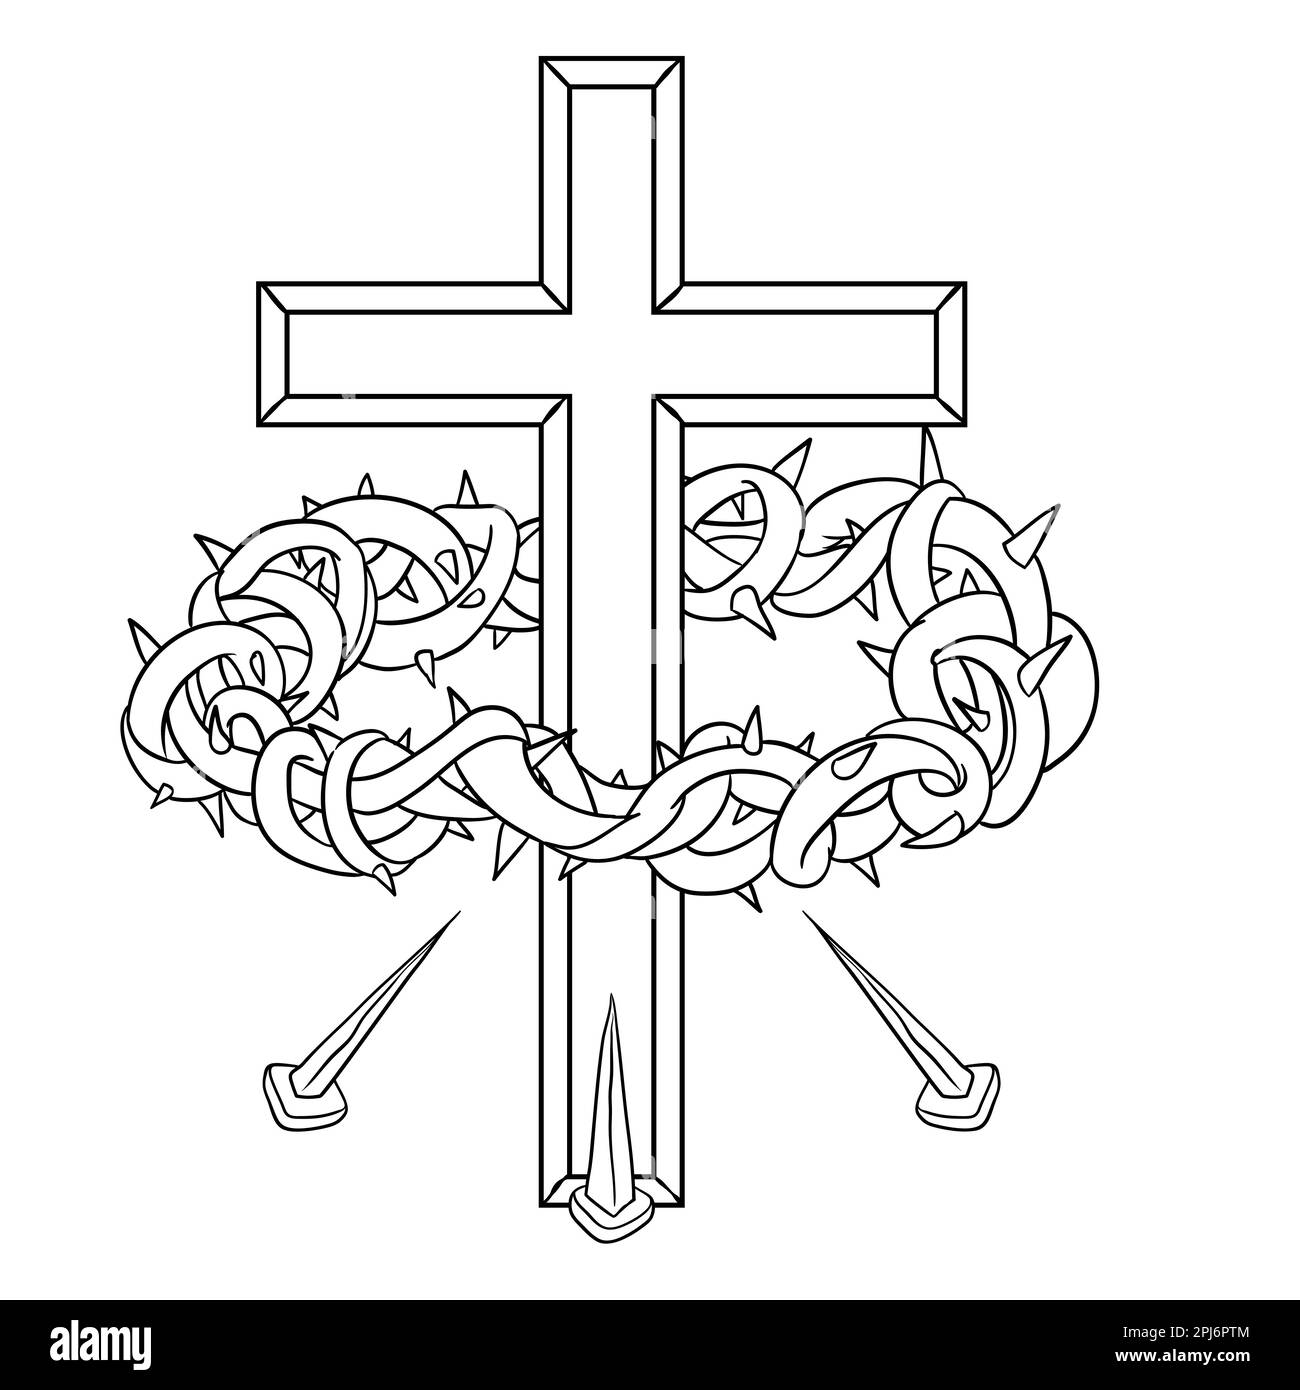 Group of Easter religious elements with cross, crown of thorns and nails in outlines for coloring activities. Stock Vector